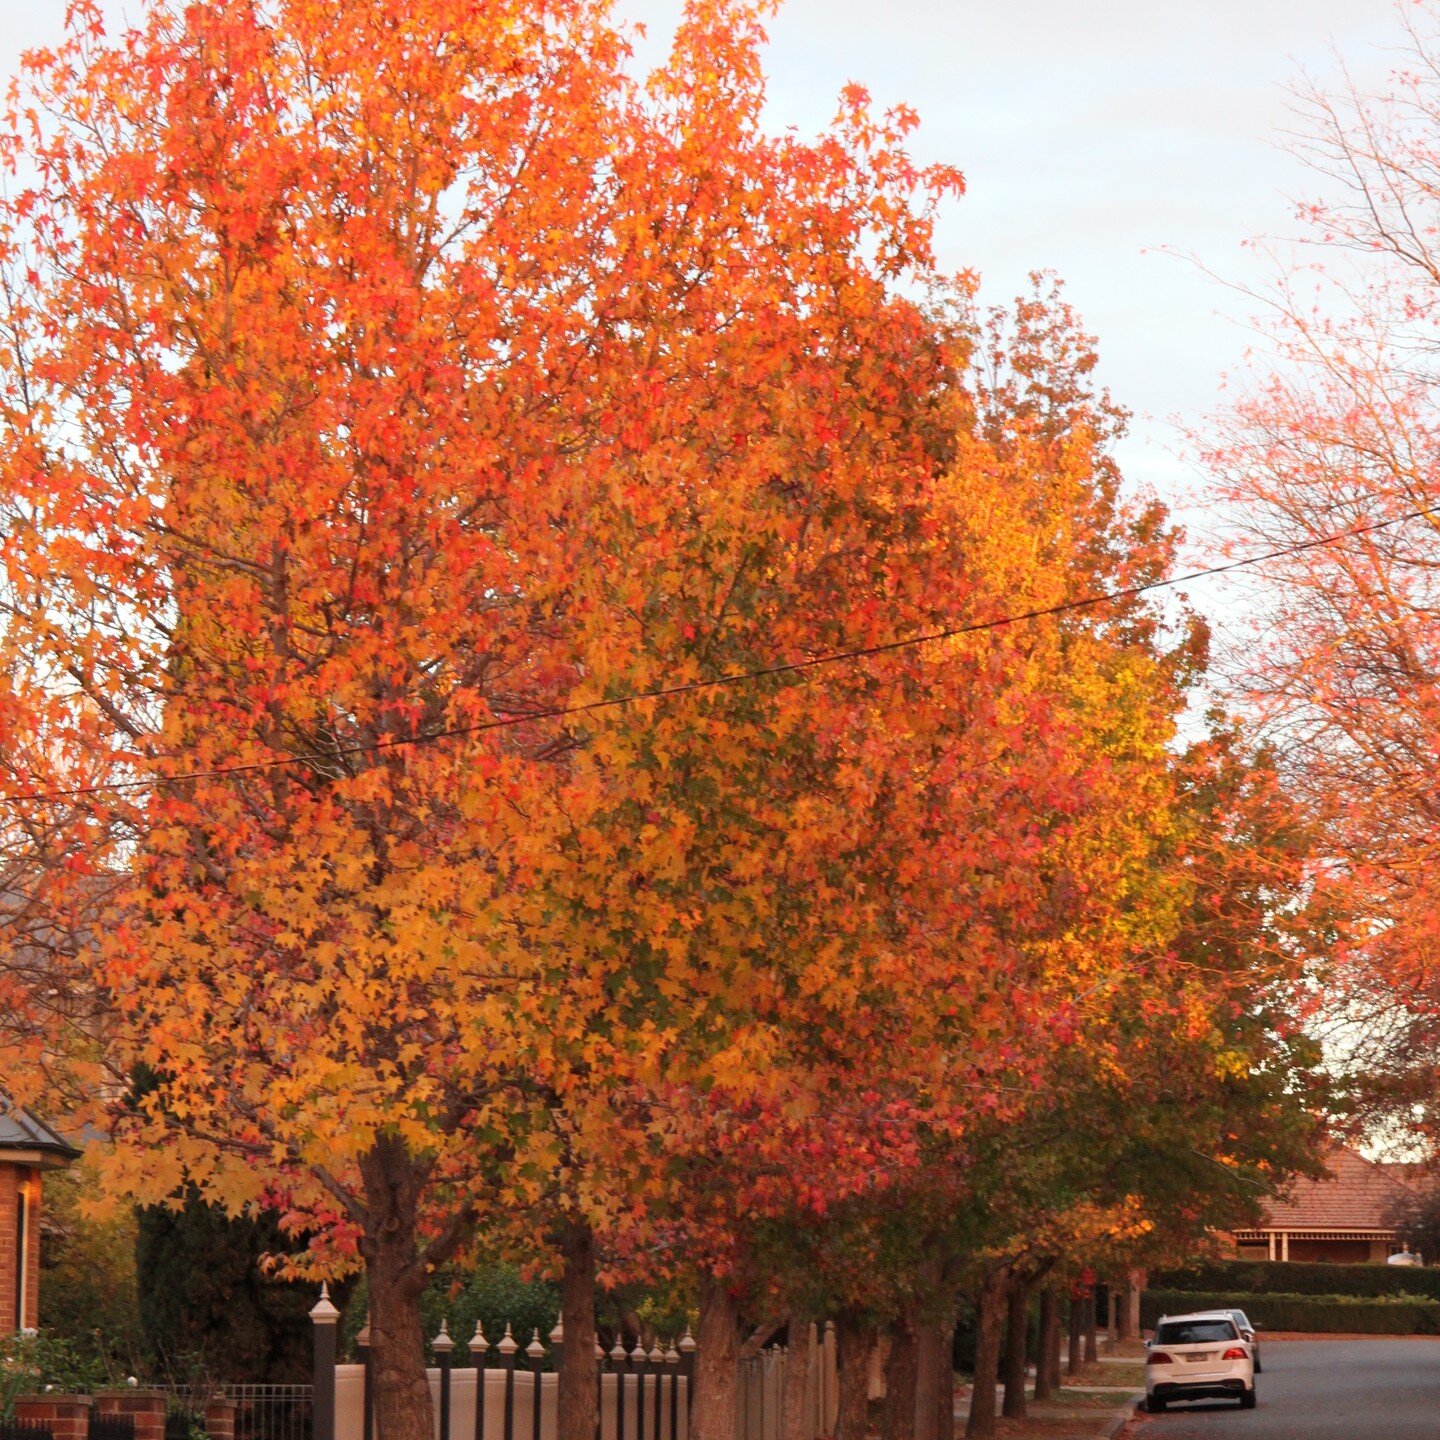 Goulburn is beautiful in all seasons but there is something magical about Autumn. The Autumn colour compliments the amazing heritage architecture of the city and it makes for fantastic walks. All small details homes are carefully restored heritage pr